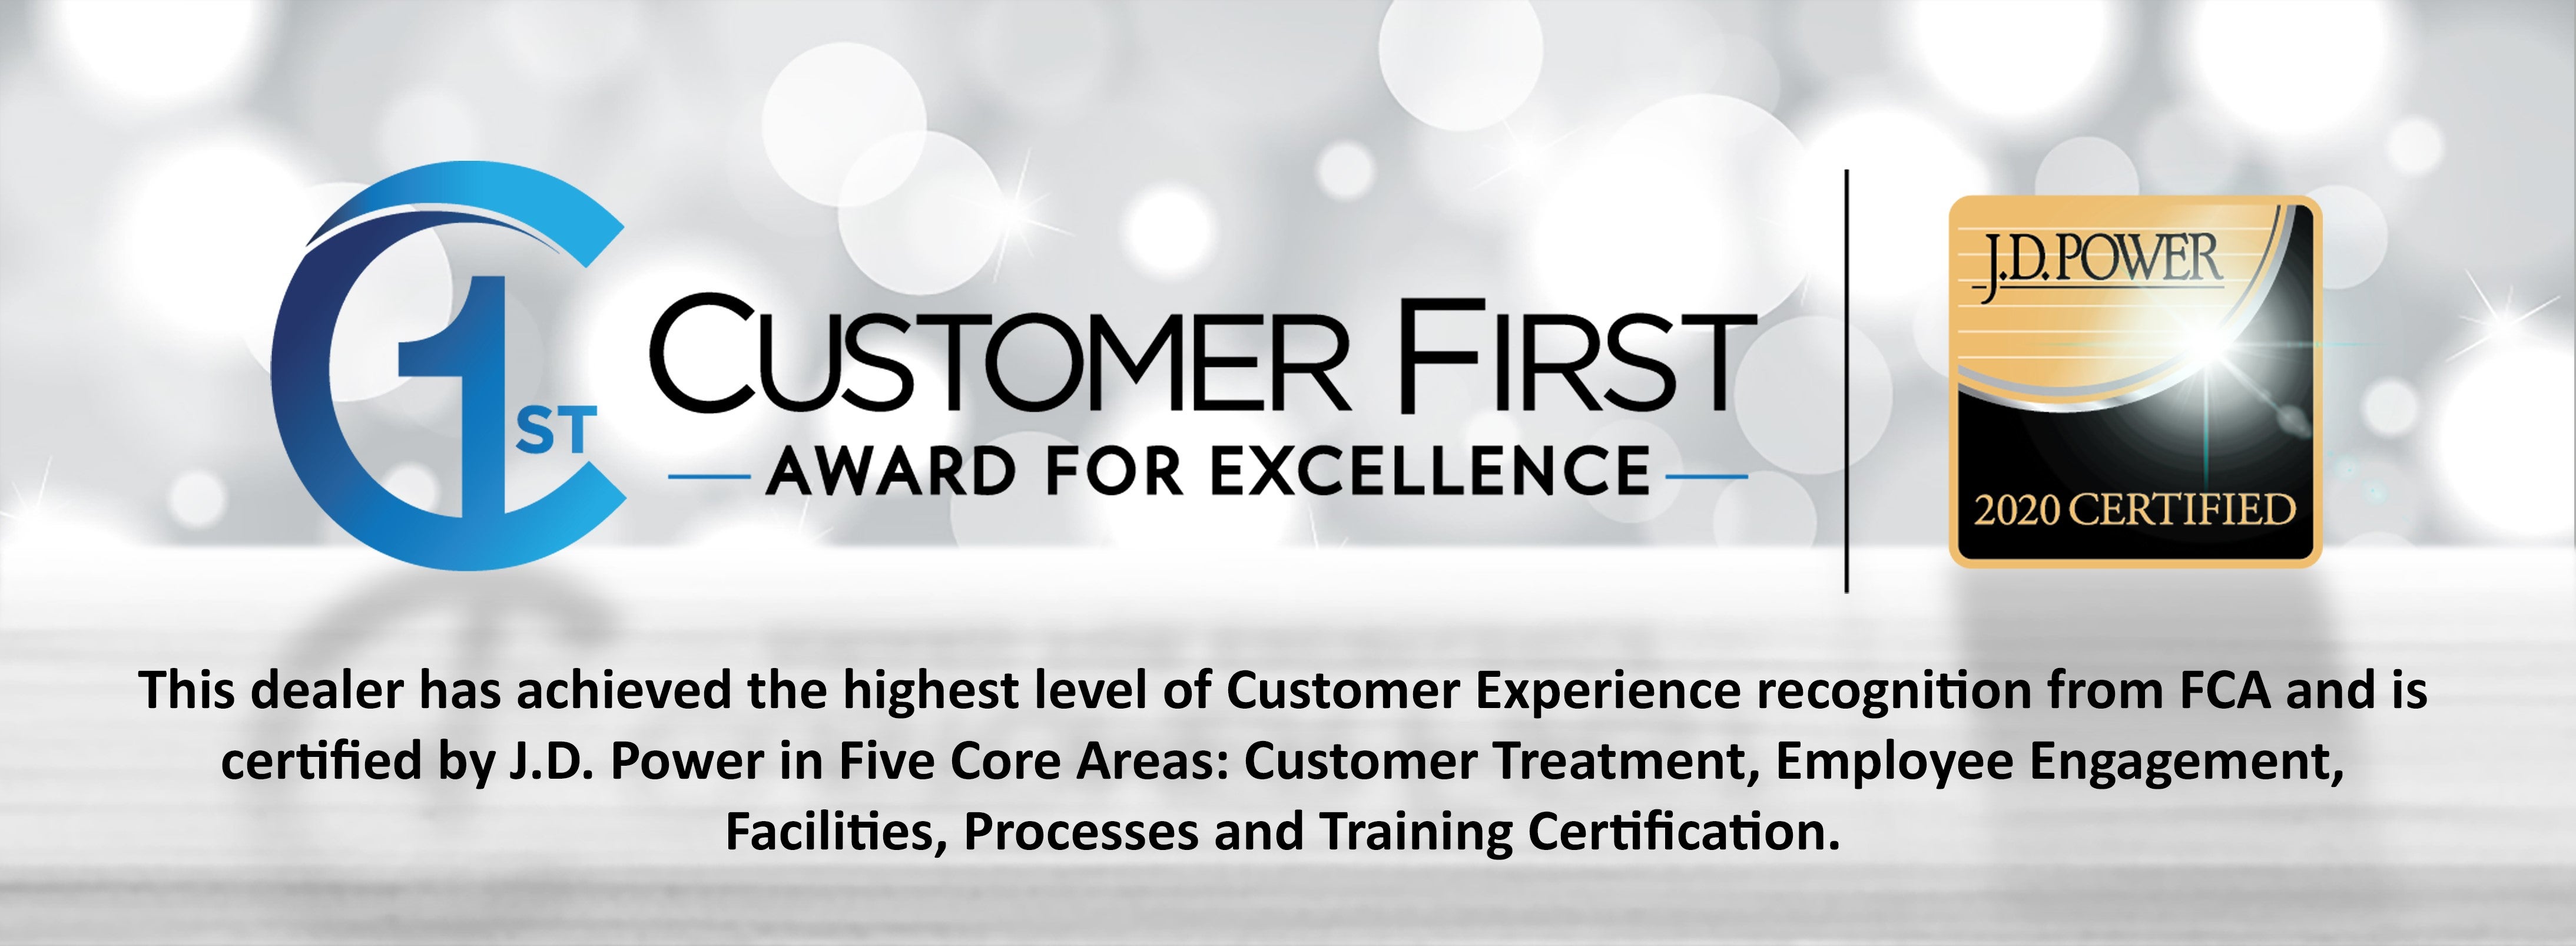 Customer First Award for Excellence for 2019 at Fayetteville Chrysler Dodge Jeep Ram in Fayetteville, TN